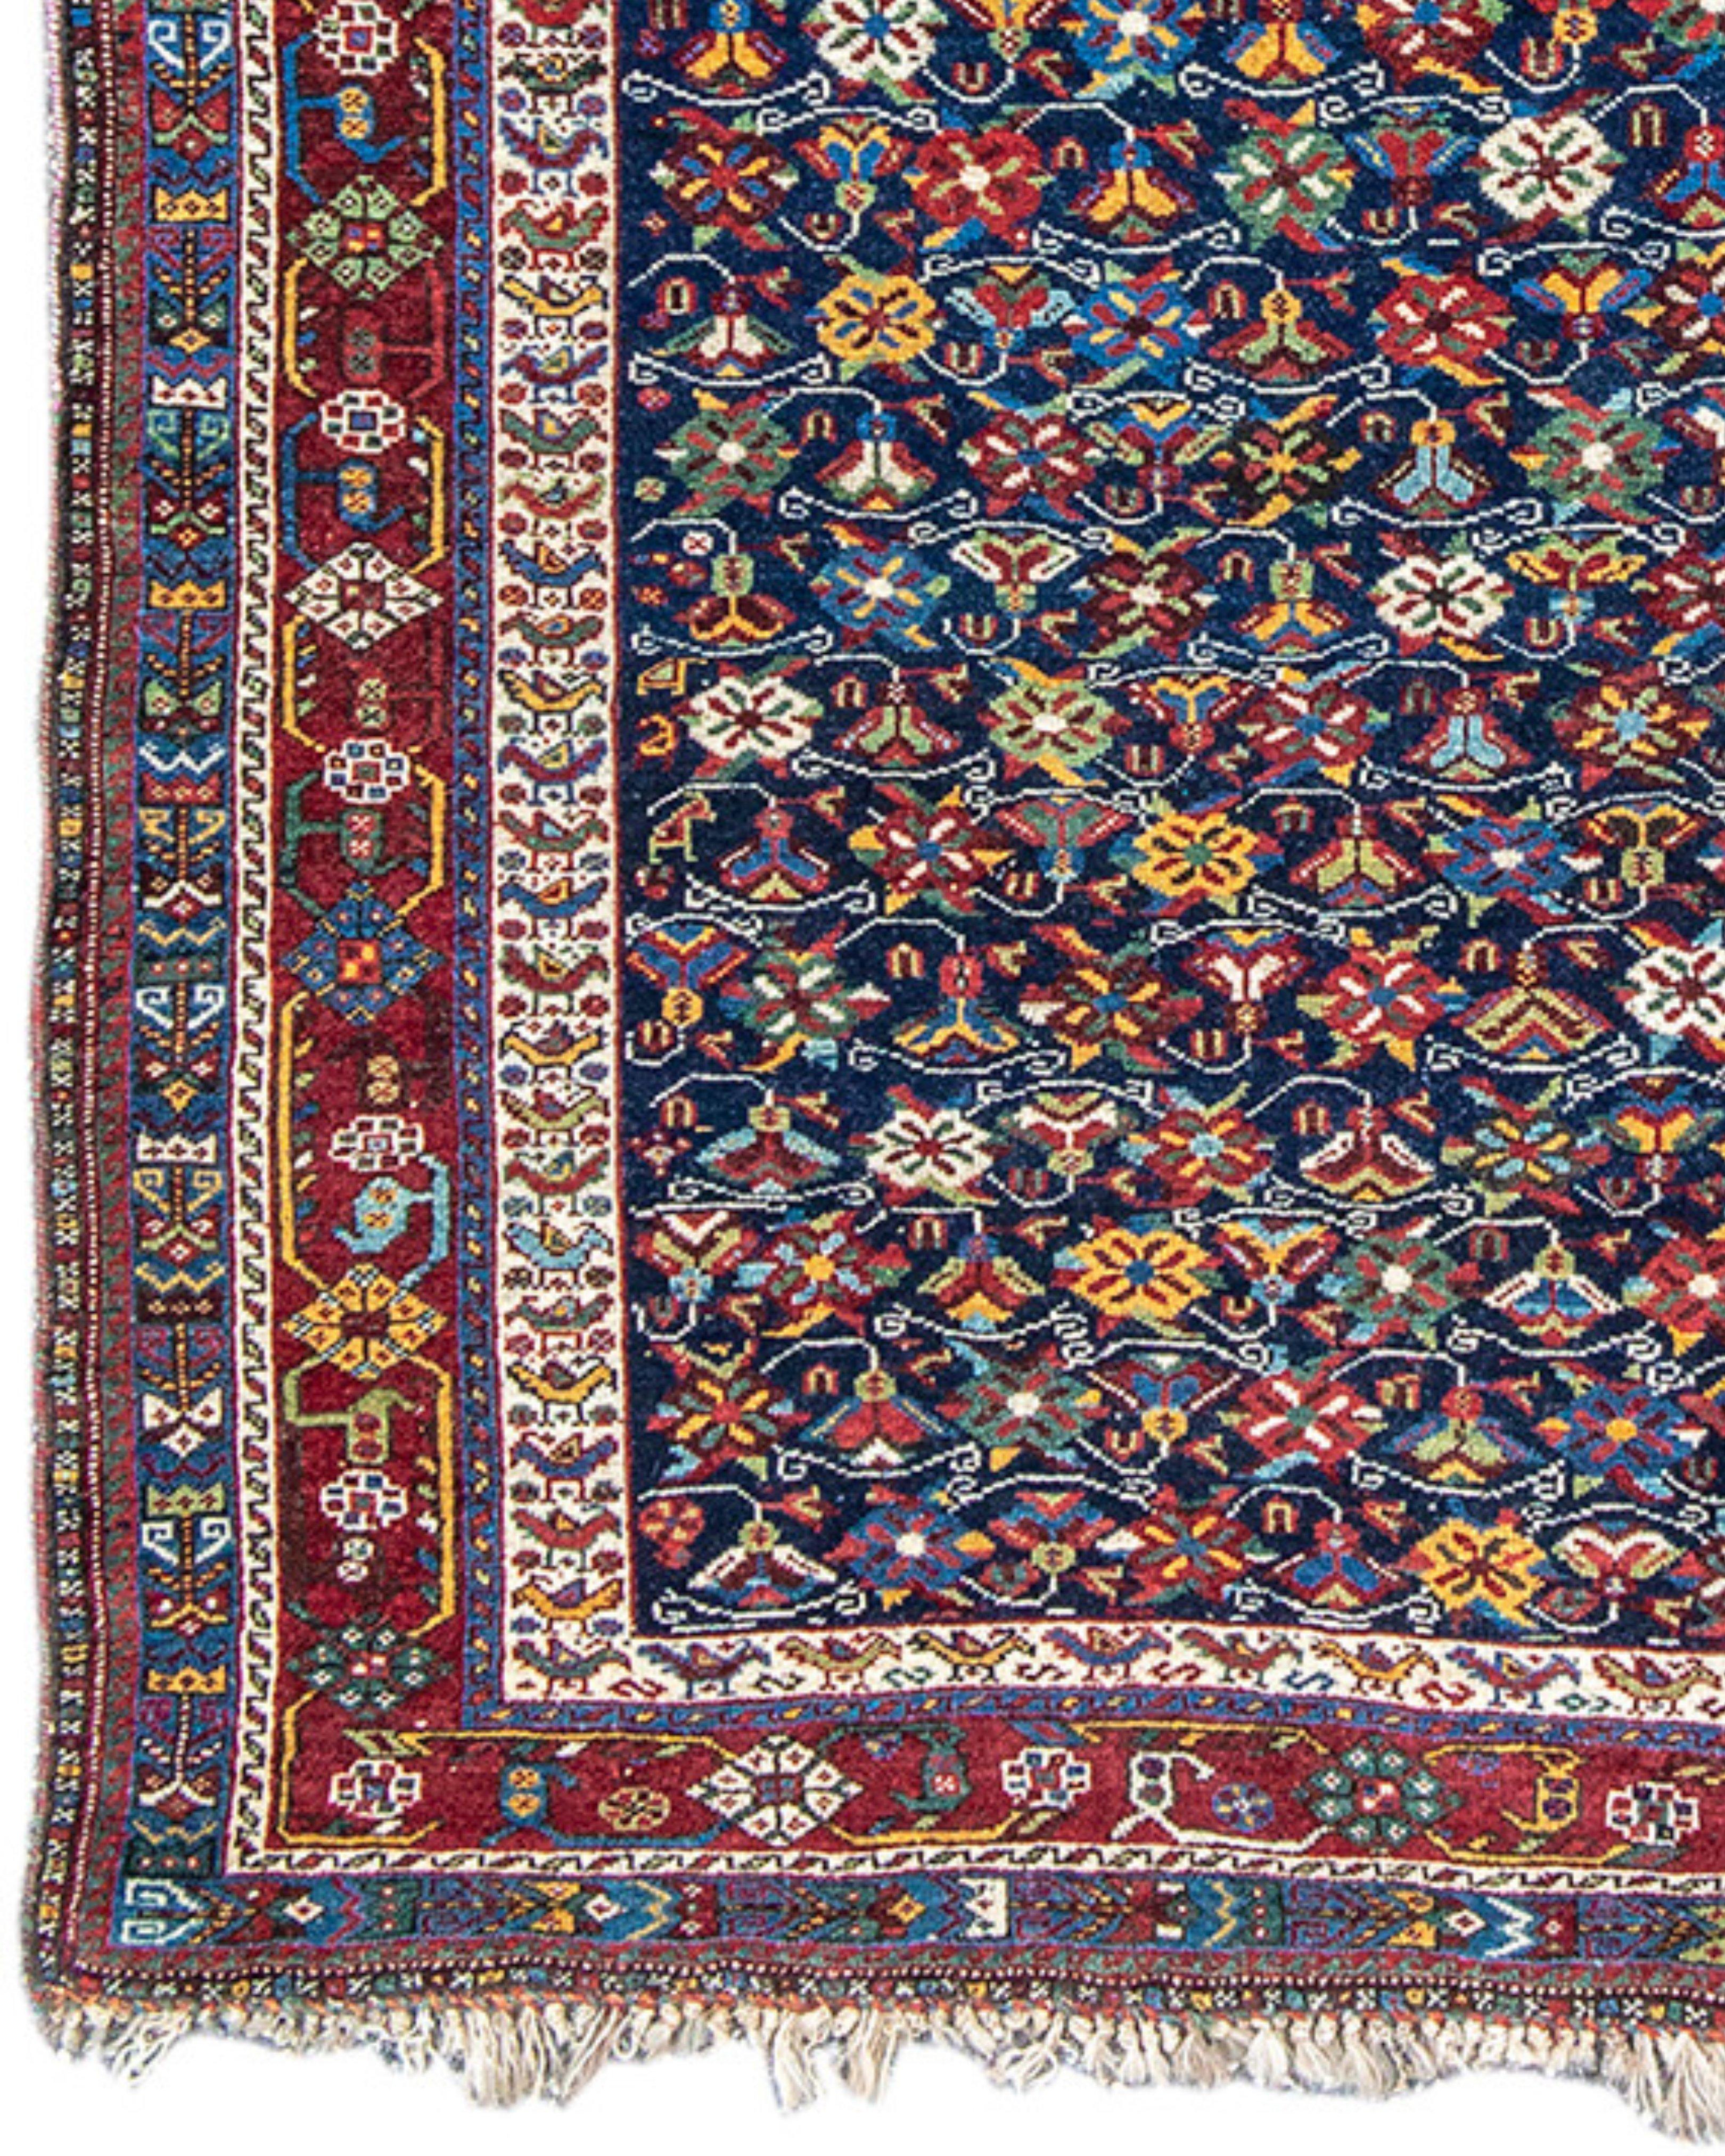 Khamseh Rug, 4th Quarter 19th Century

Tribal rugs from south Persia often adhere to a style with consistent use of materials and techniques. This rug, though, appears to be a hybrid of sorts. Rugs of the Khamseh Confederacy (a group of like weaving